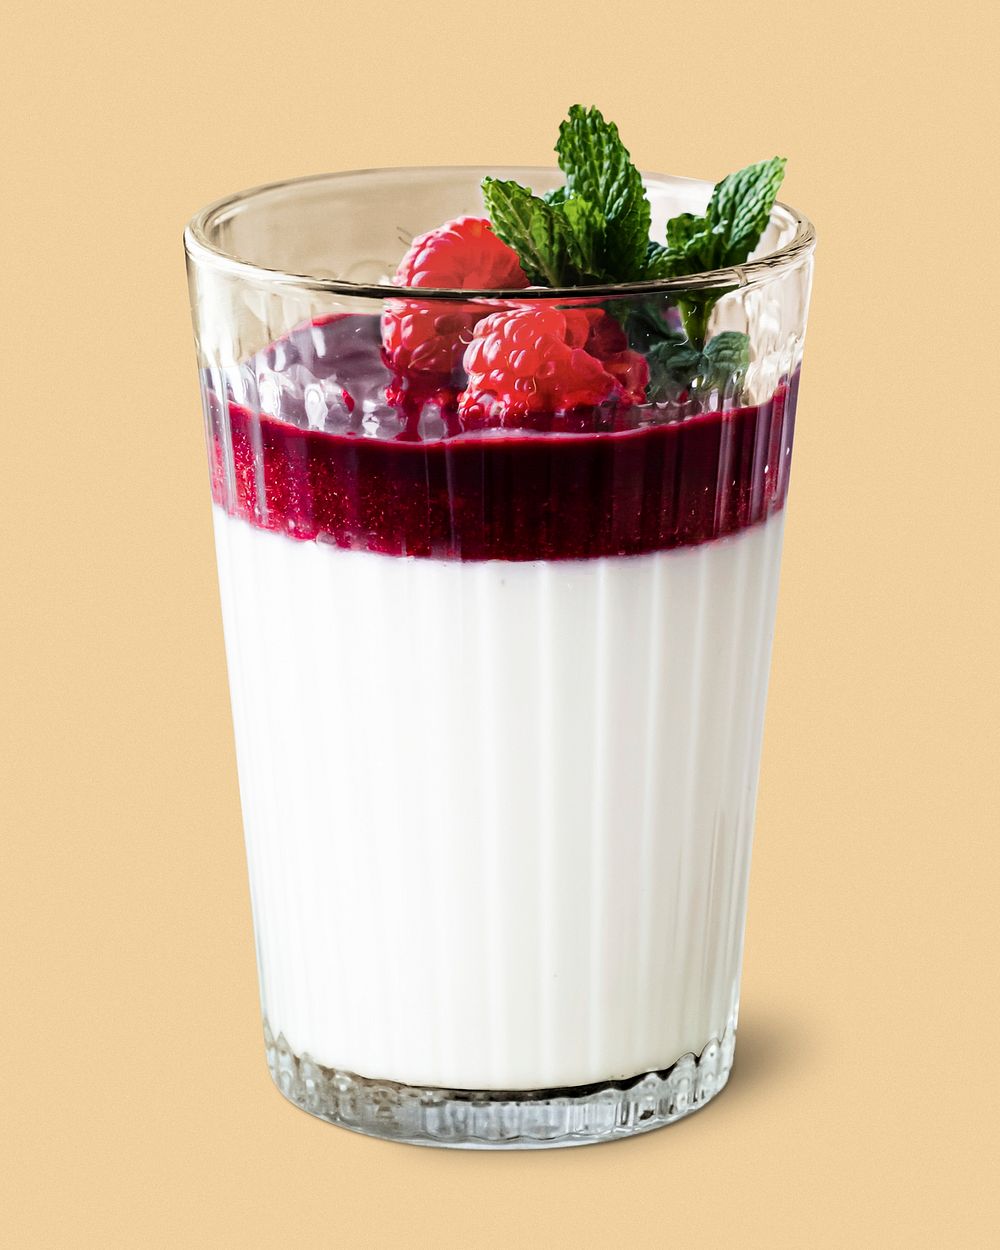 Vanilla panna cotta with raspberry served in a glass